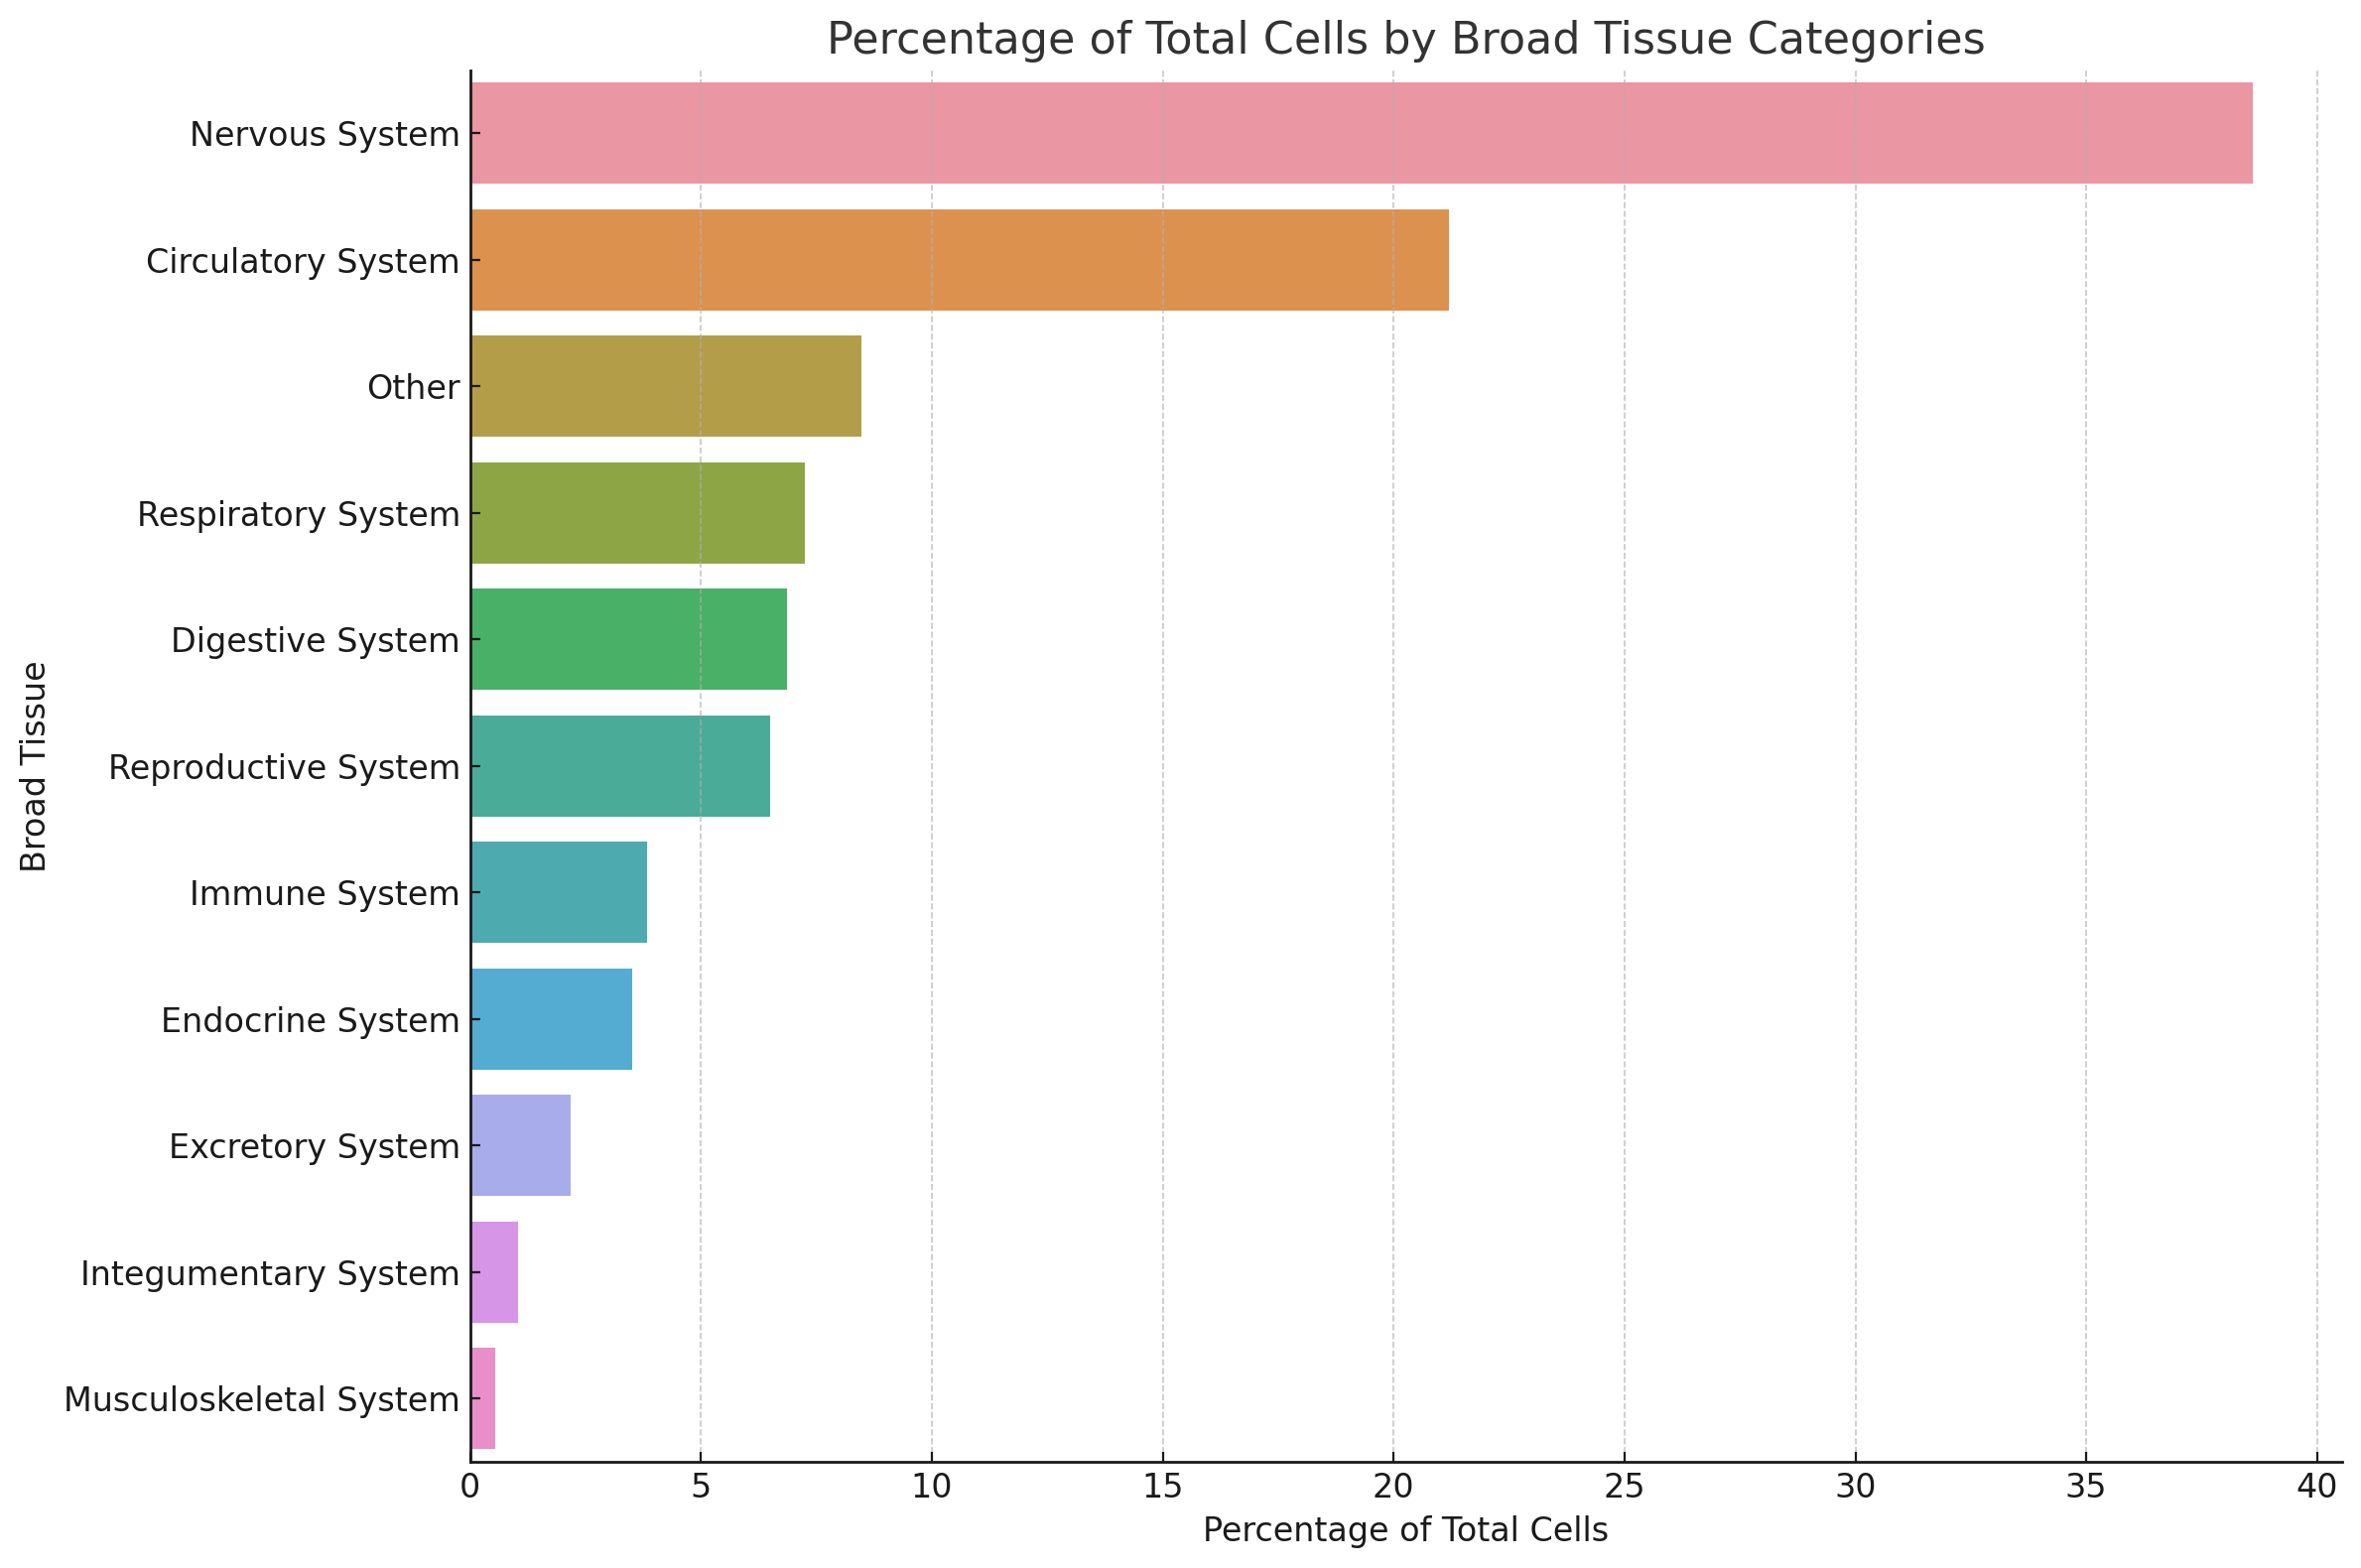 Percentage of cells by tissue